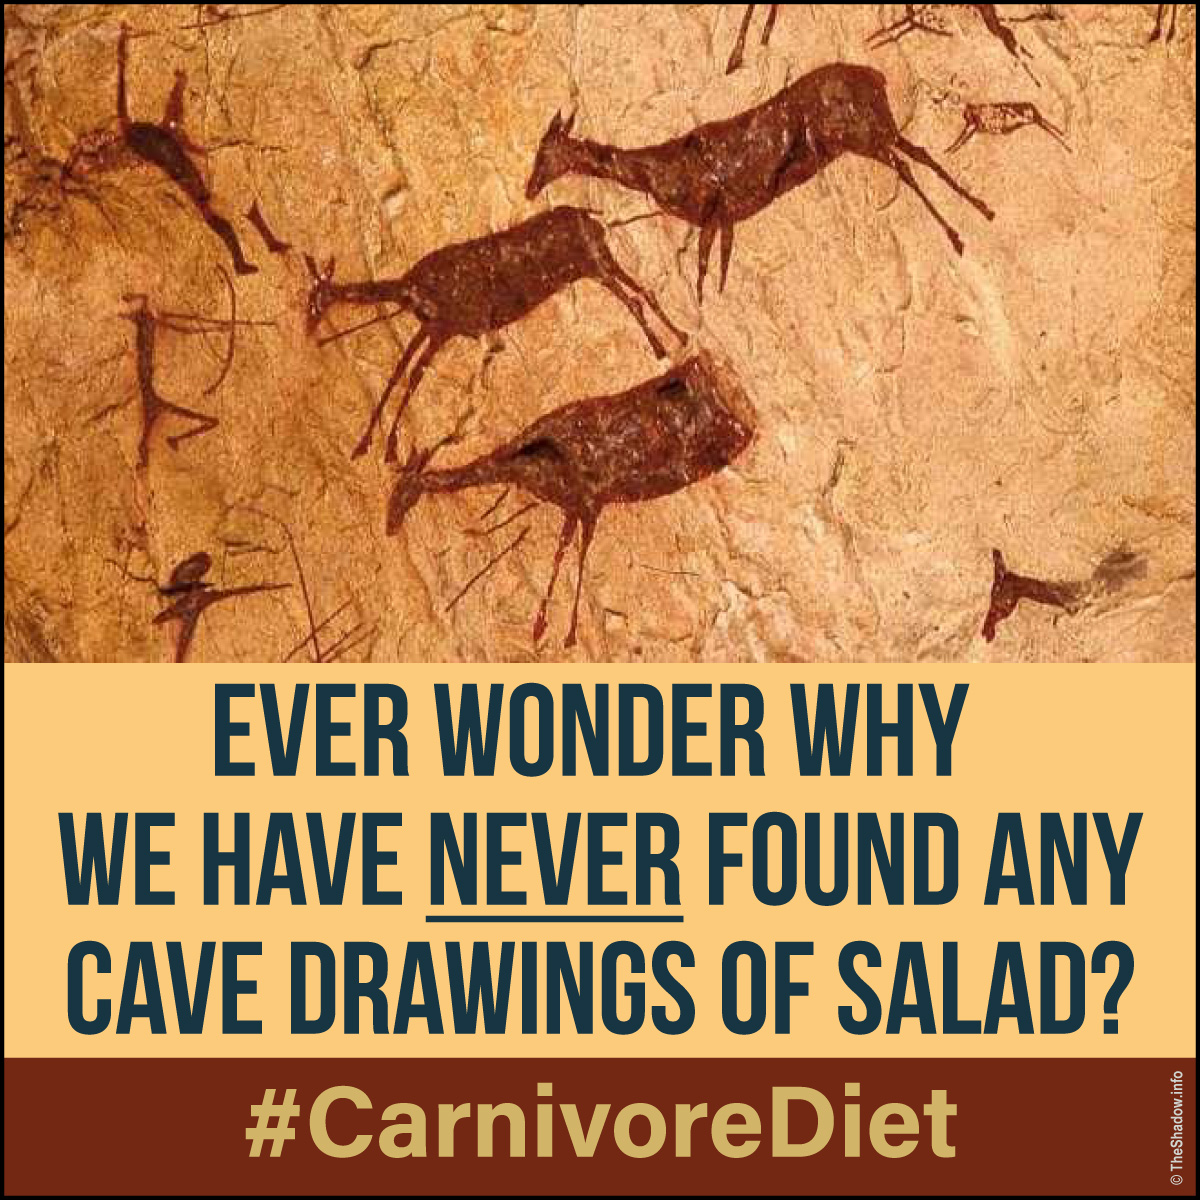 why no salad cave drawings the shadow info meme